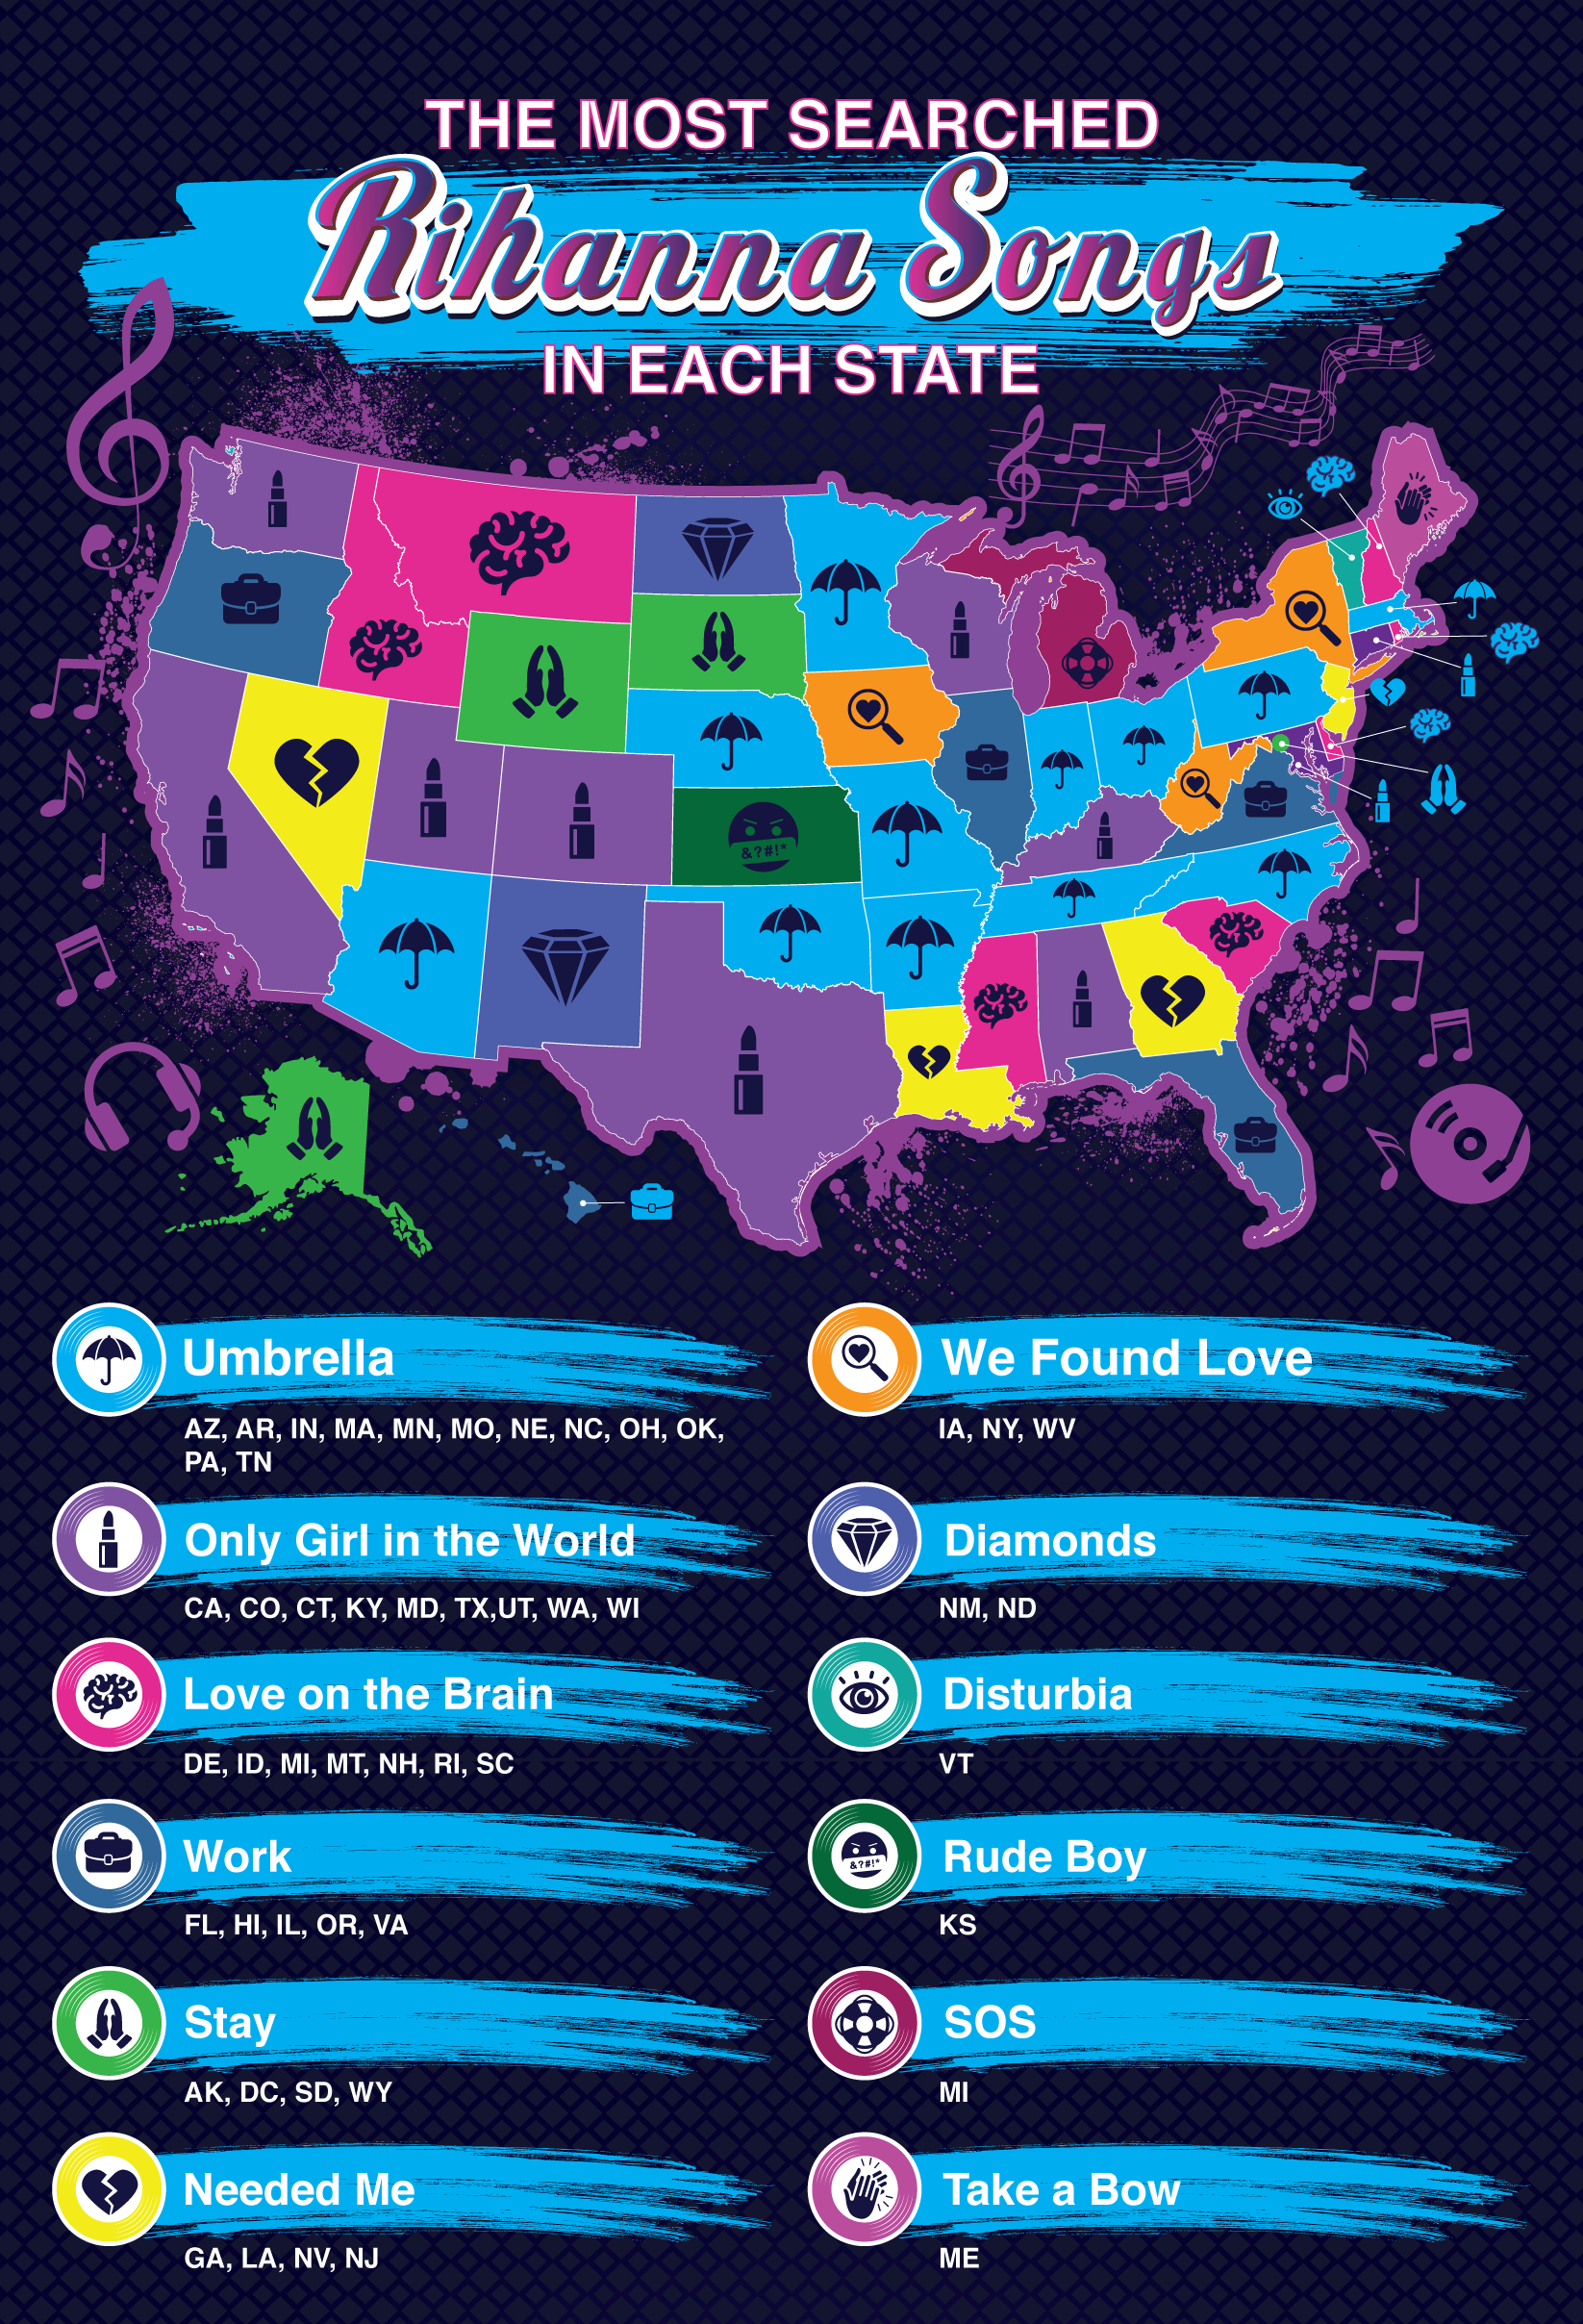 The most searched Rihanna songs in each state